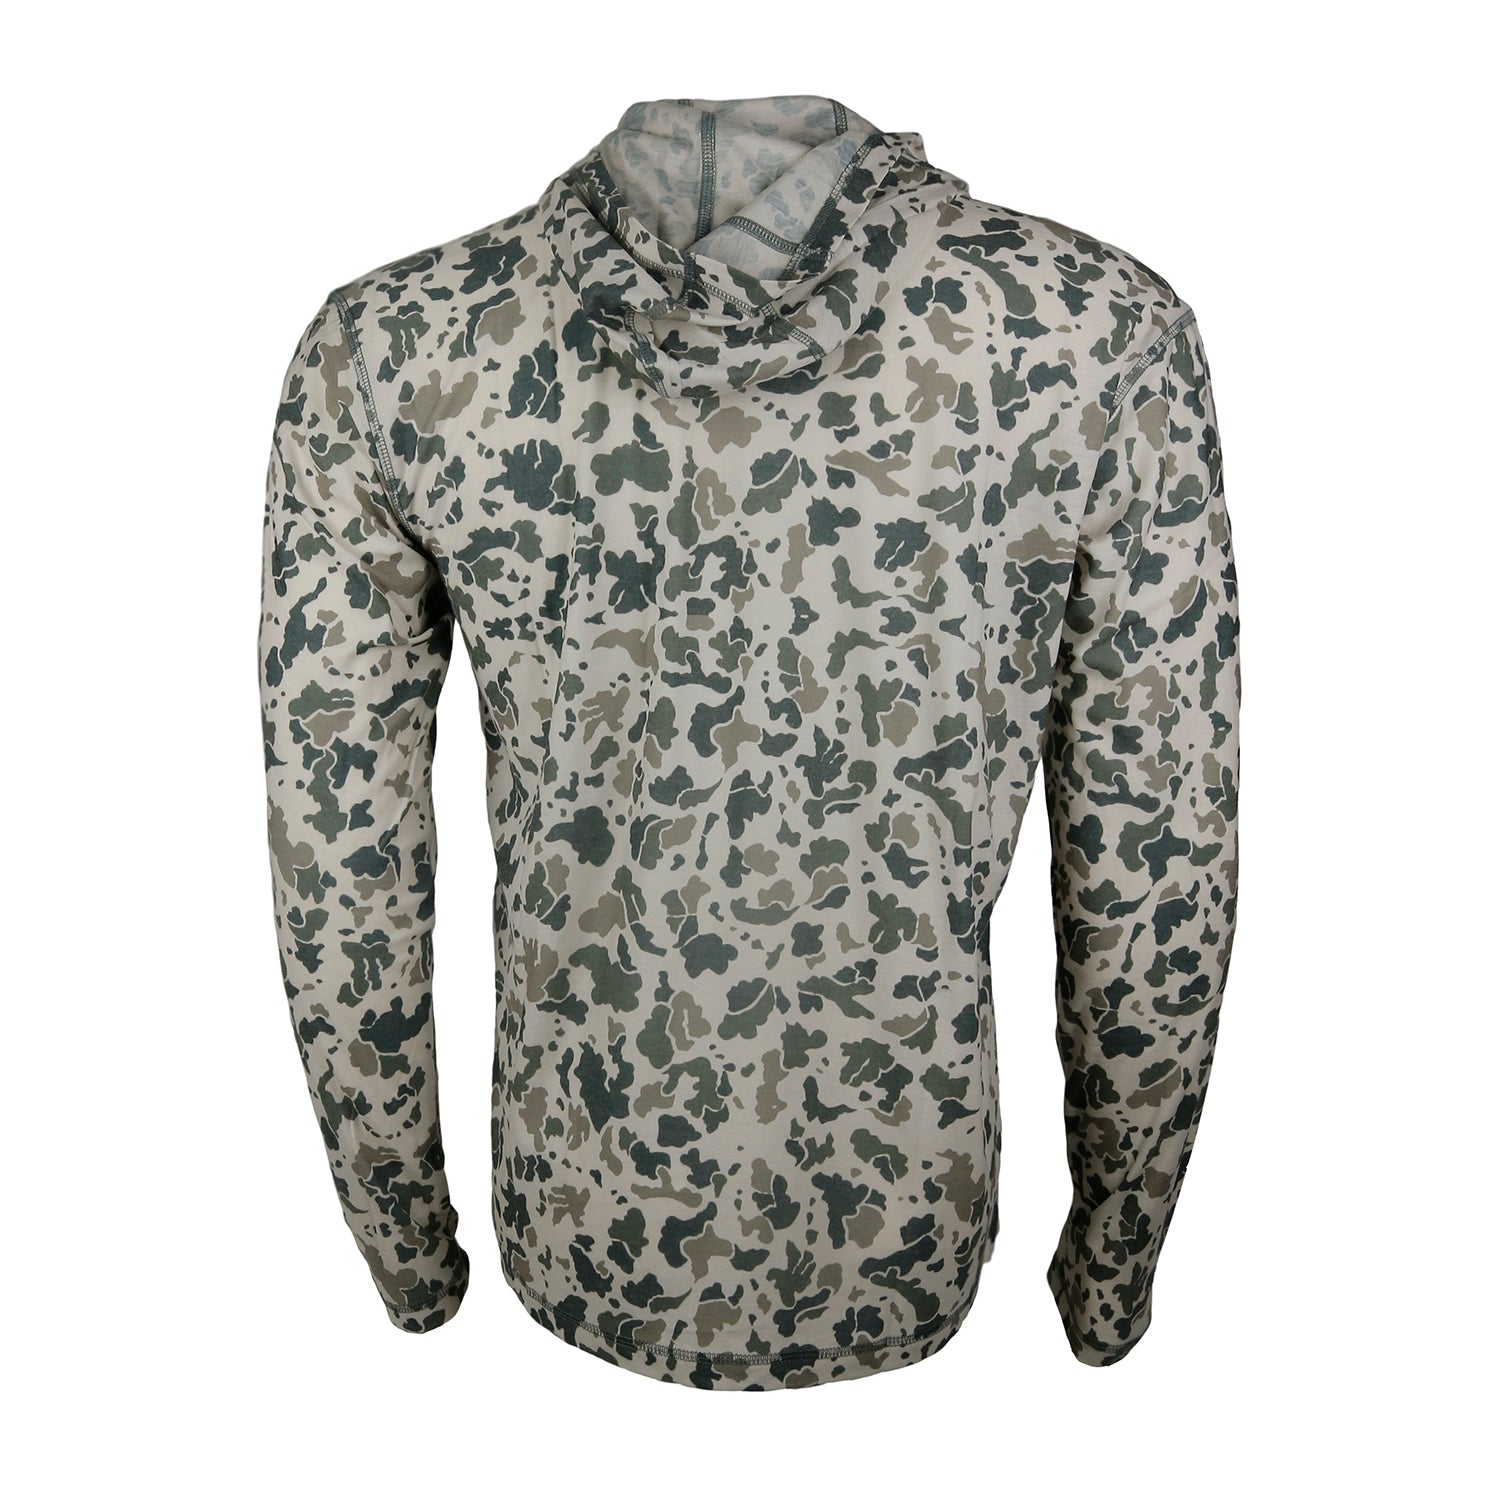 A camo printed sun hoody from the back with the hood down.